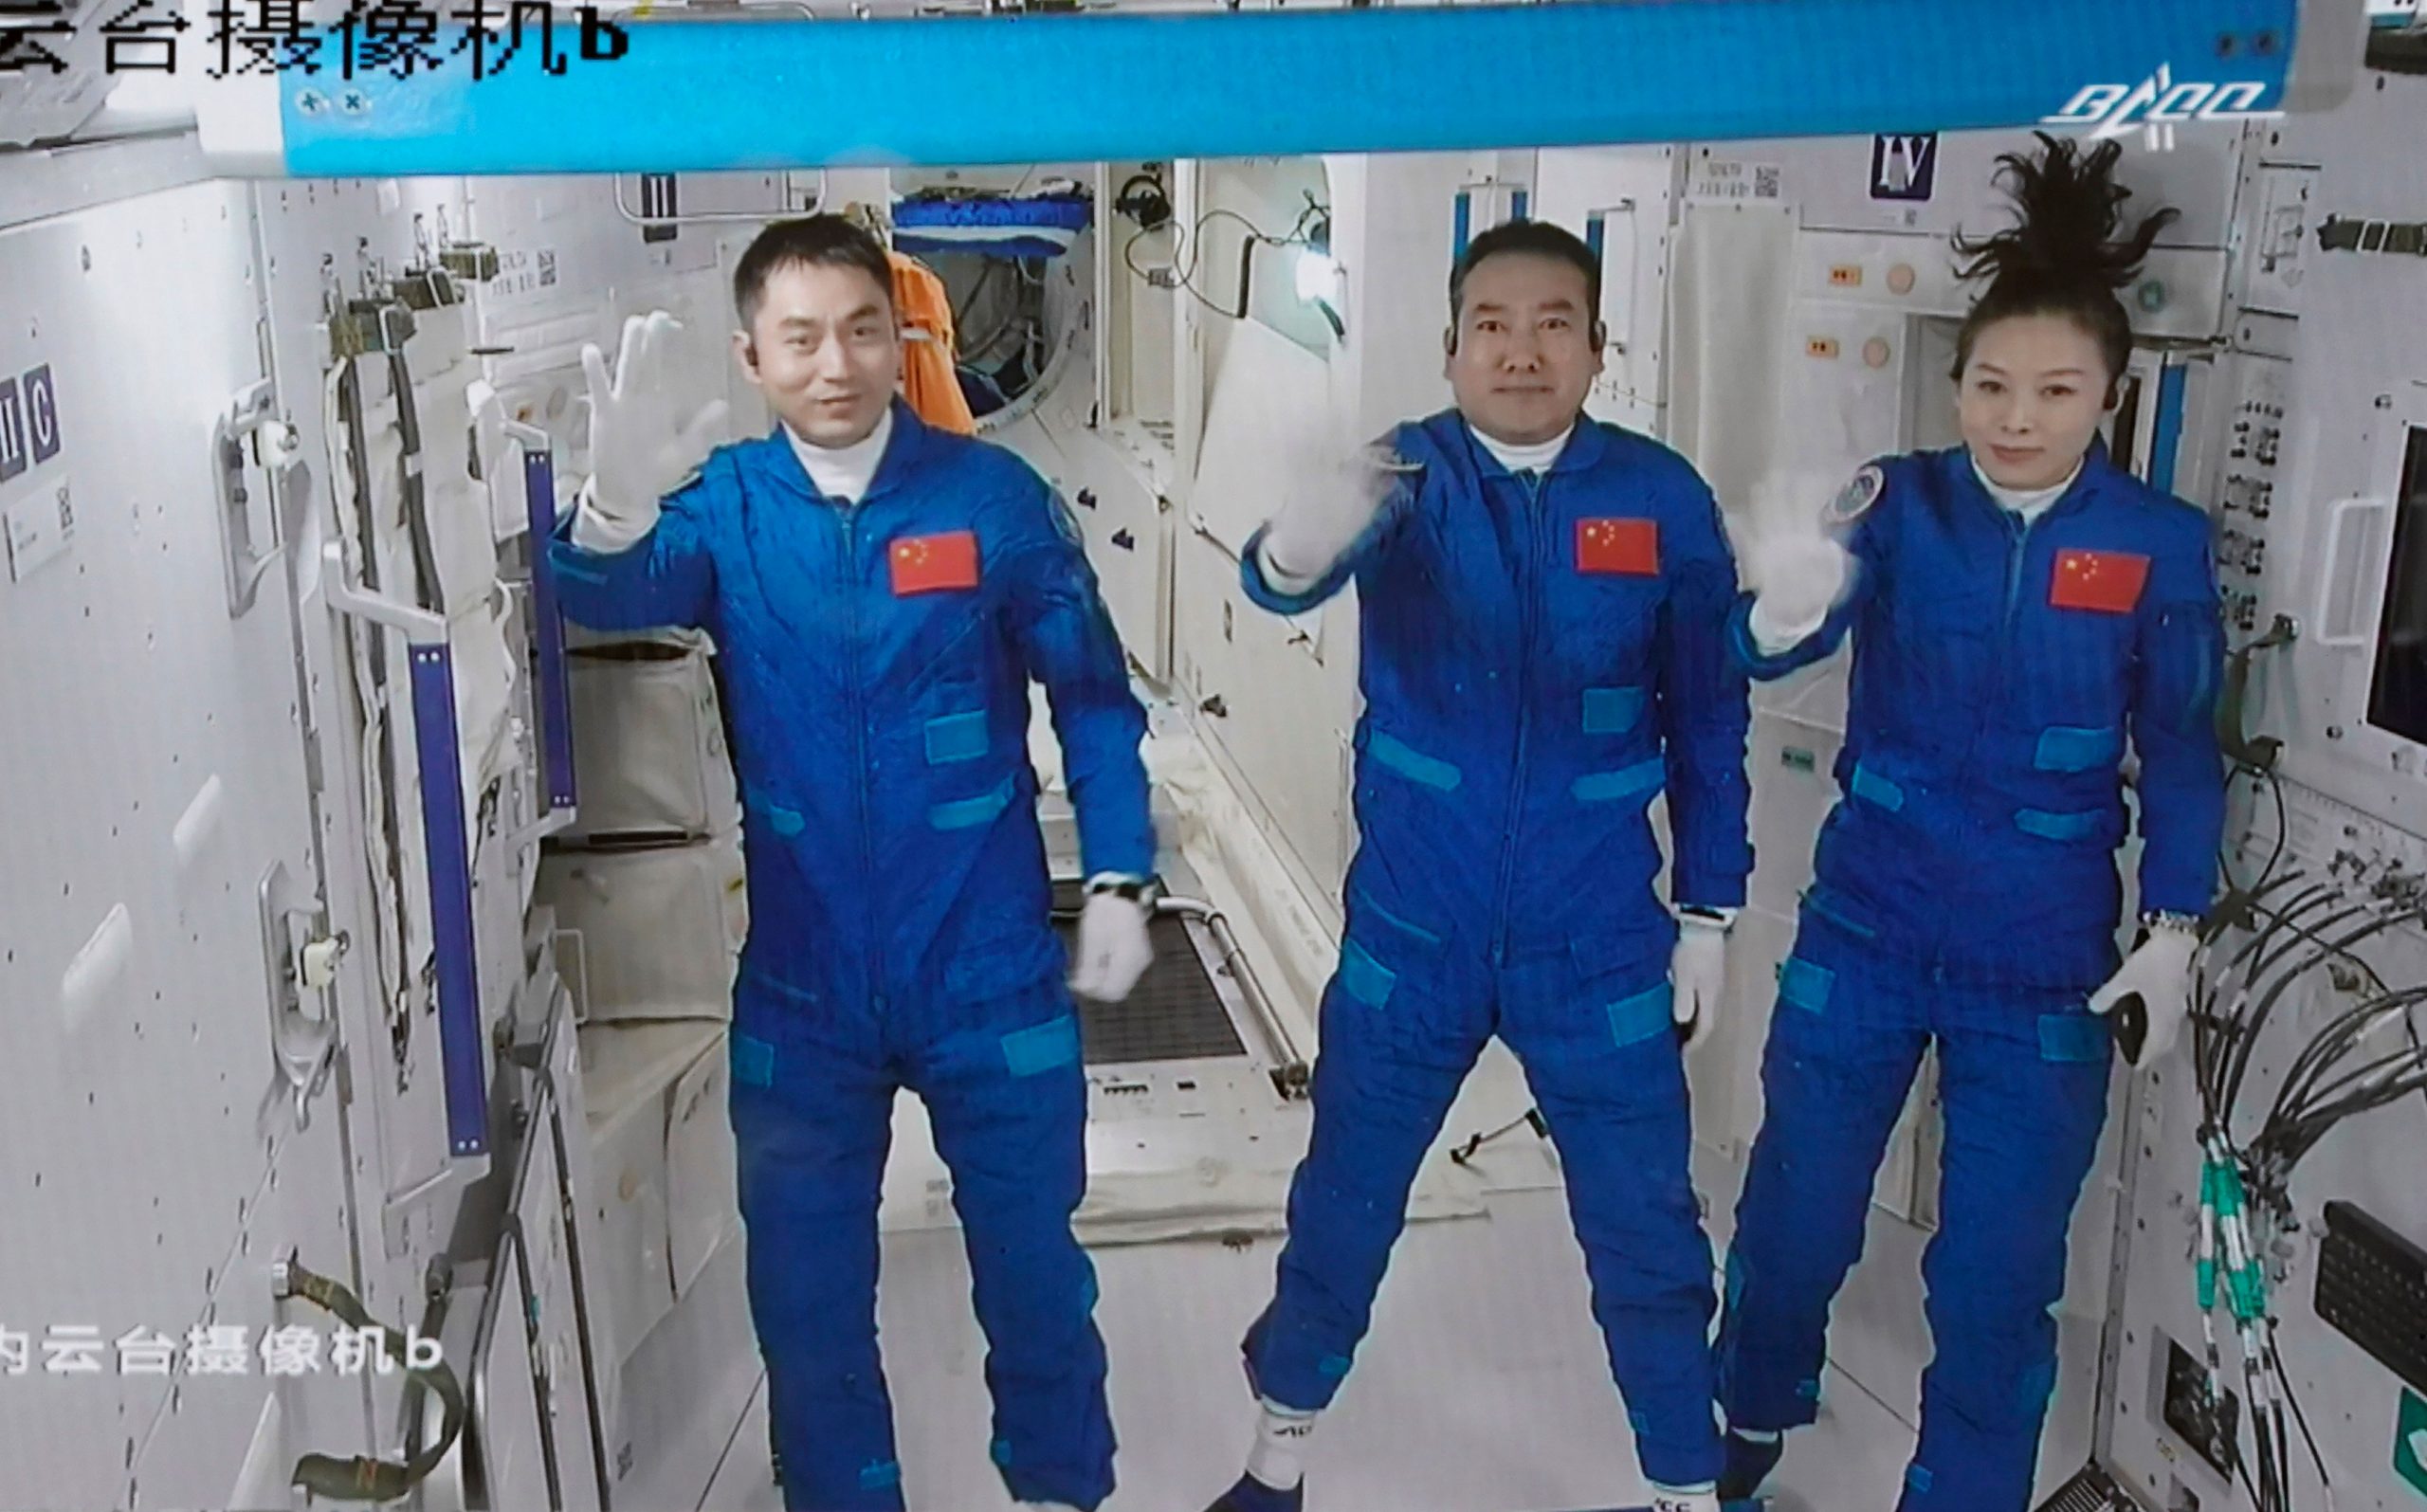 Astronauts land after 6 months on space station, longest mission to date for China